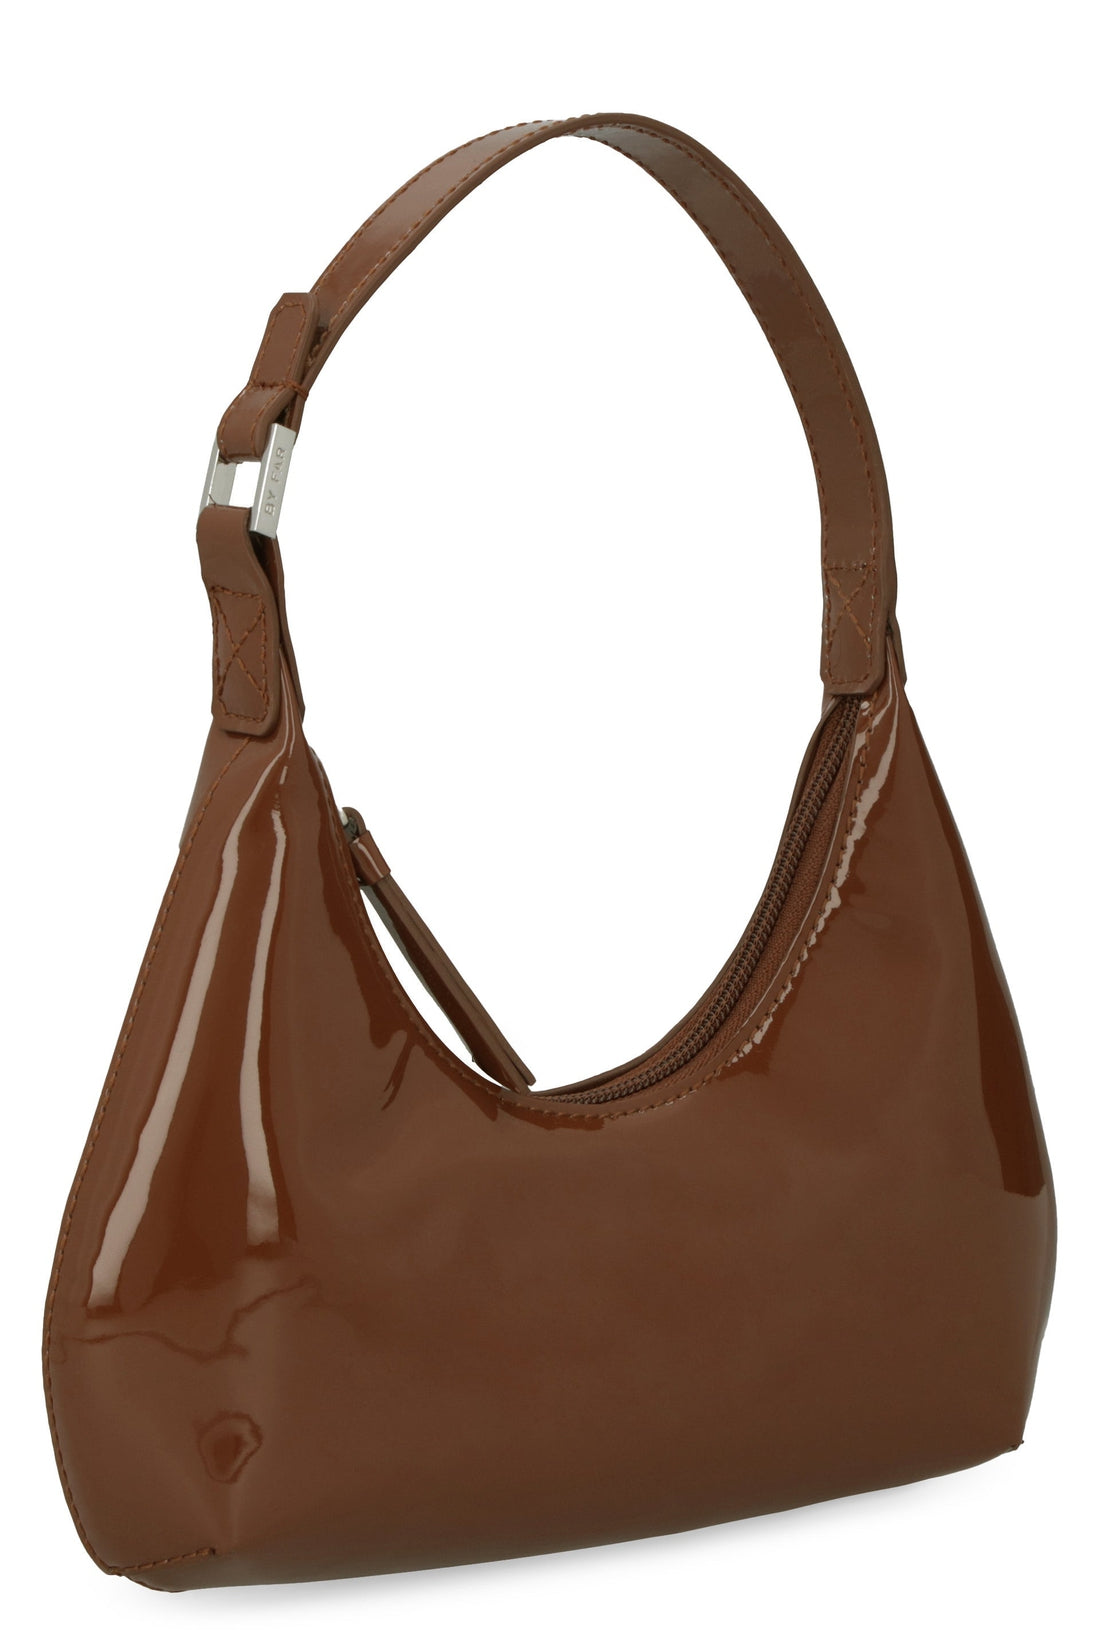 BY FAR-OUTLET-SALE-Baby Amber patent leather handbag-ARCHIVIST